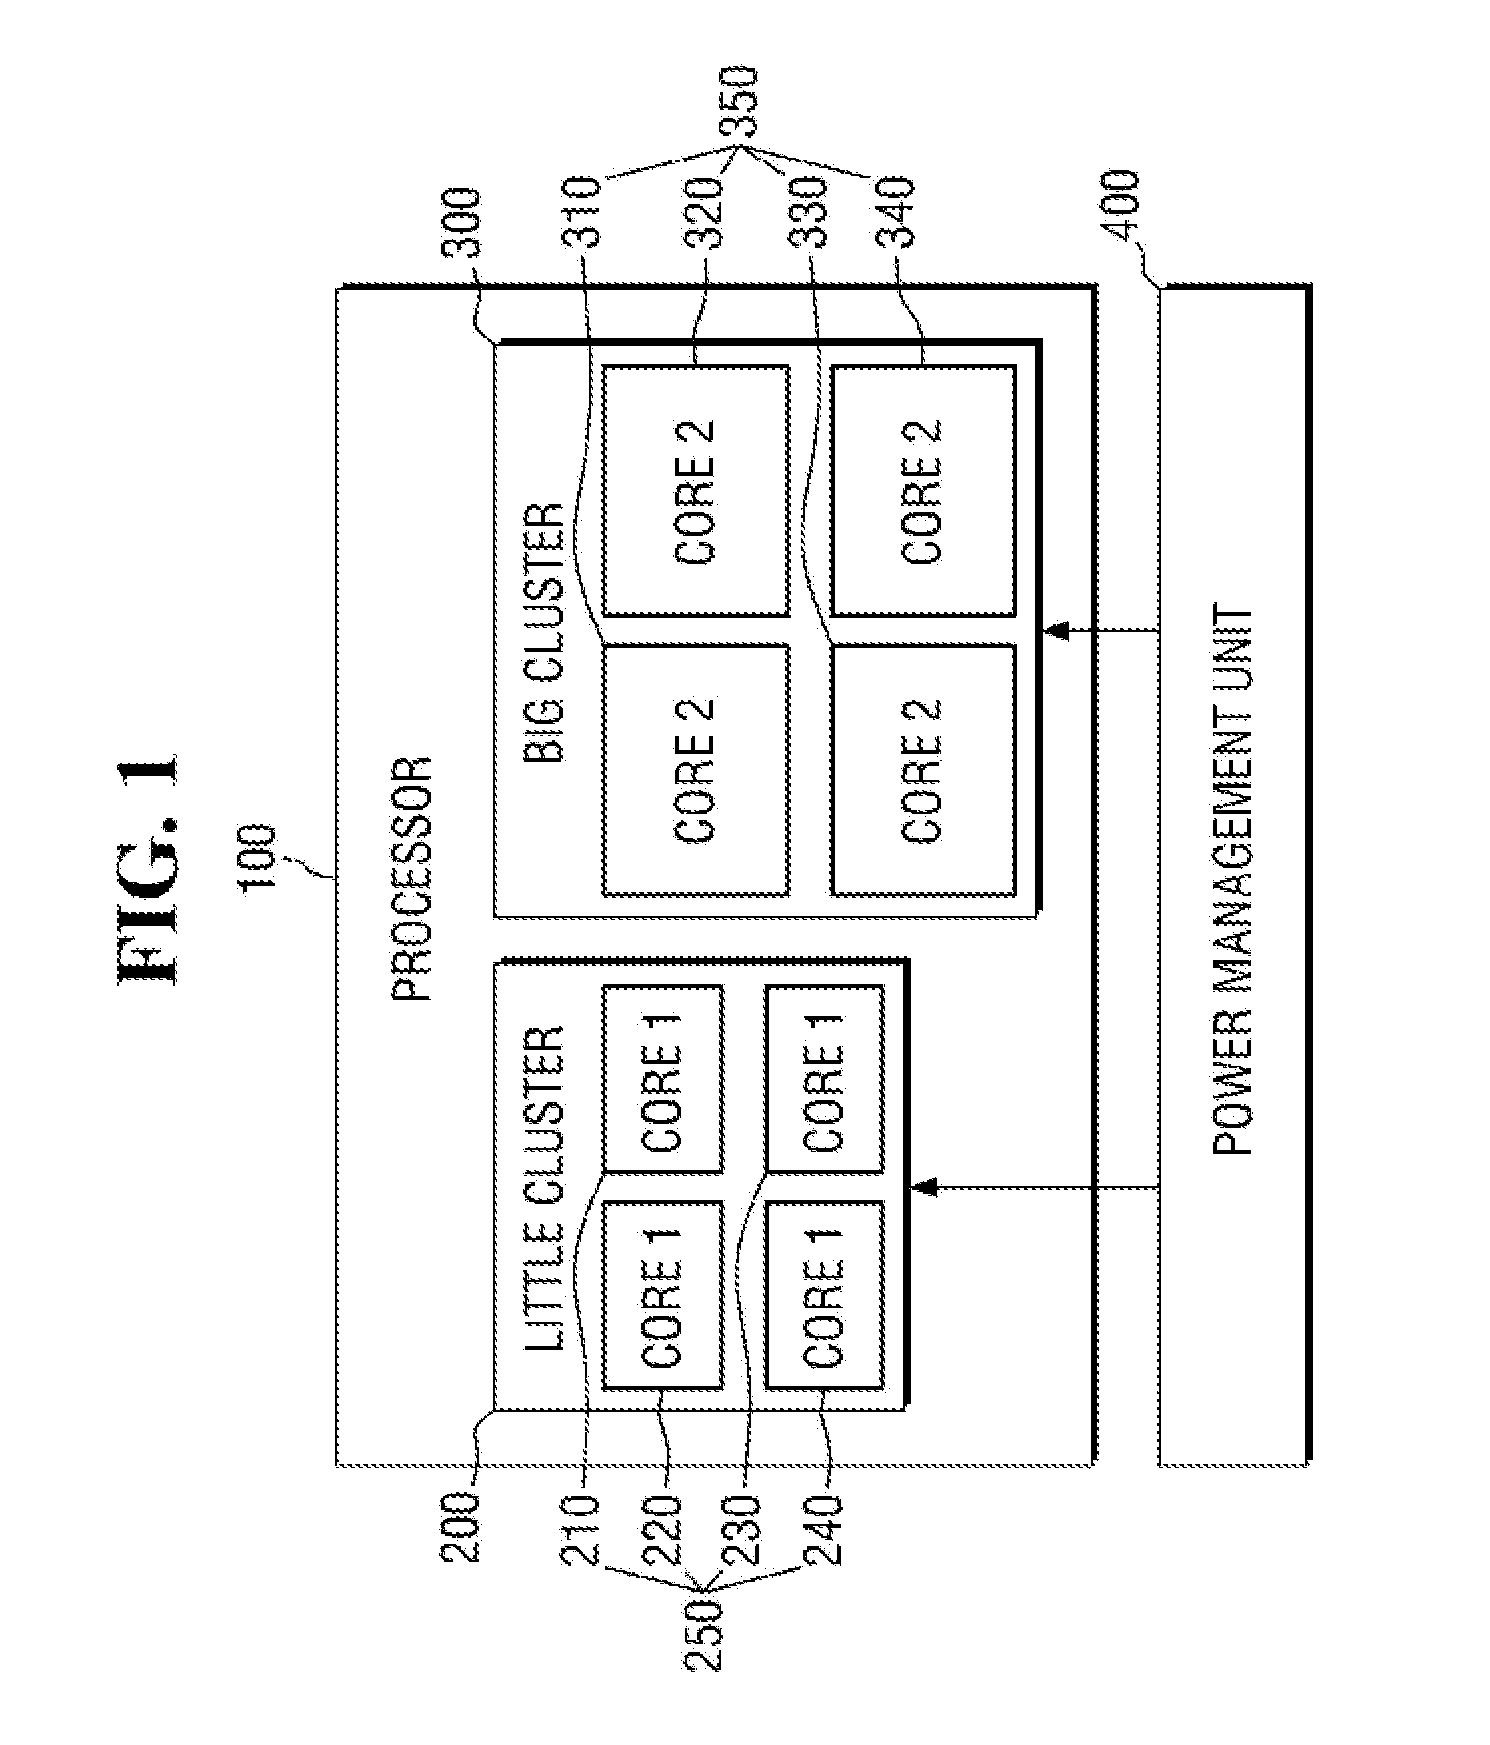 Multi-cluster processing system and method of operating the same